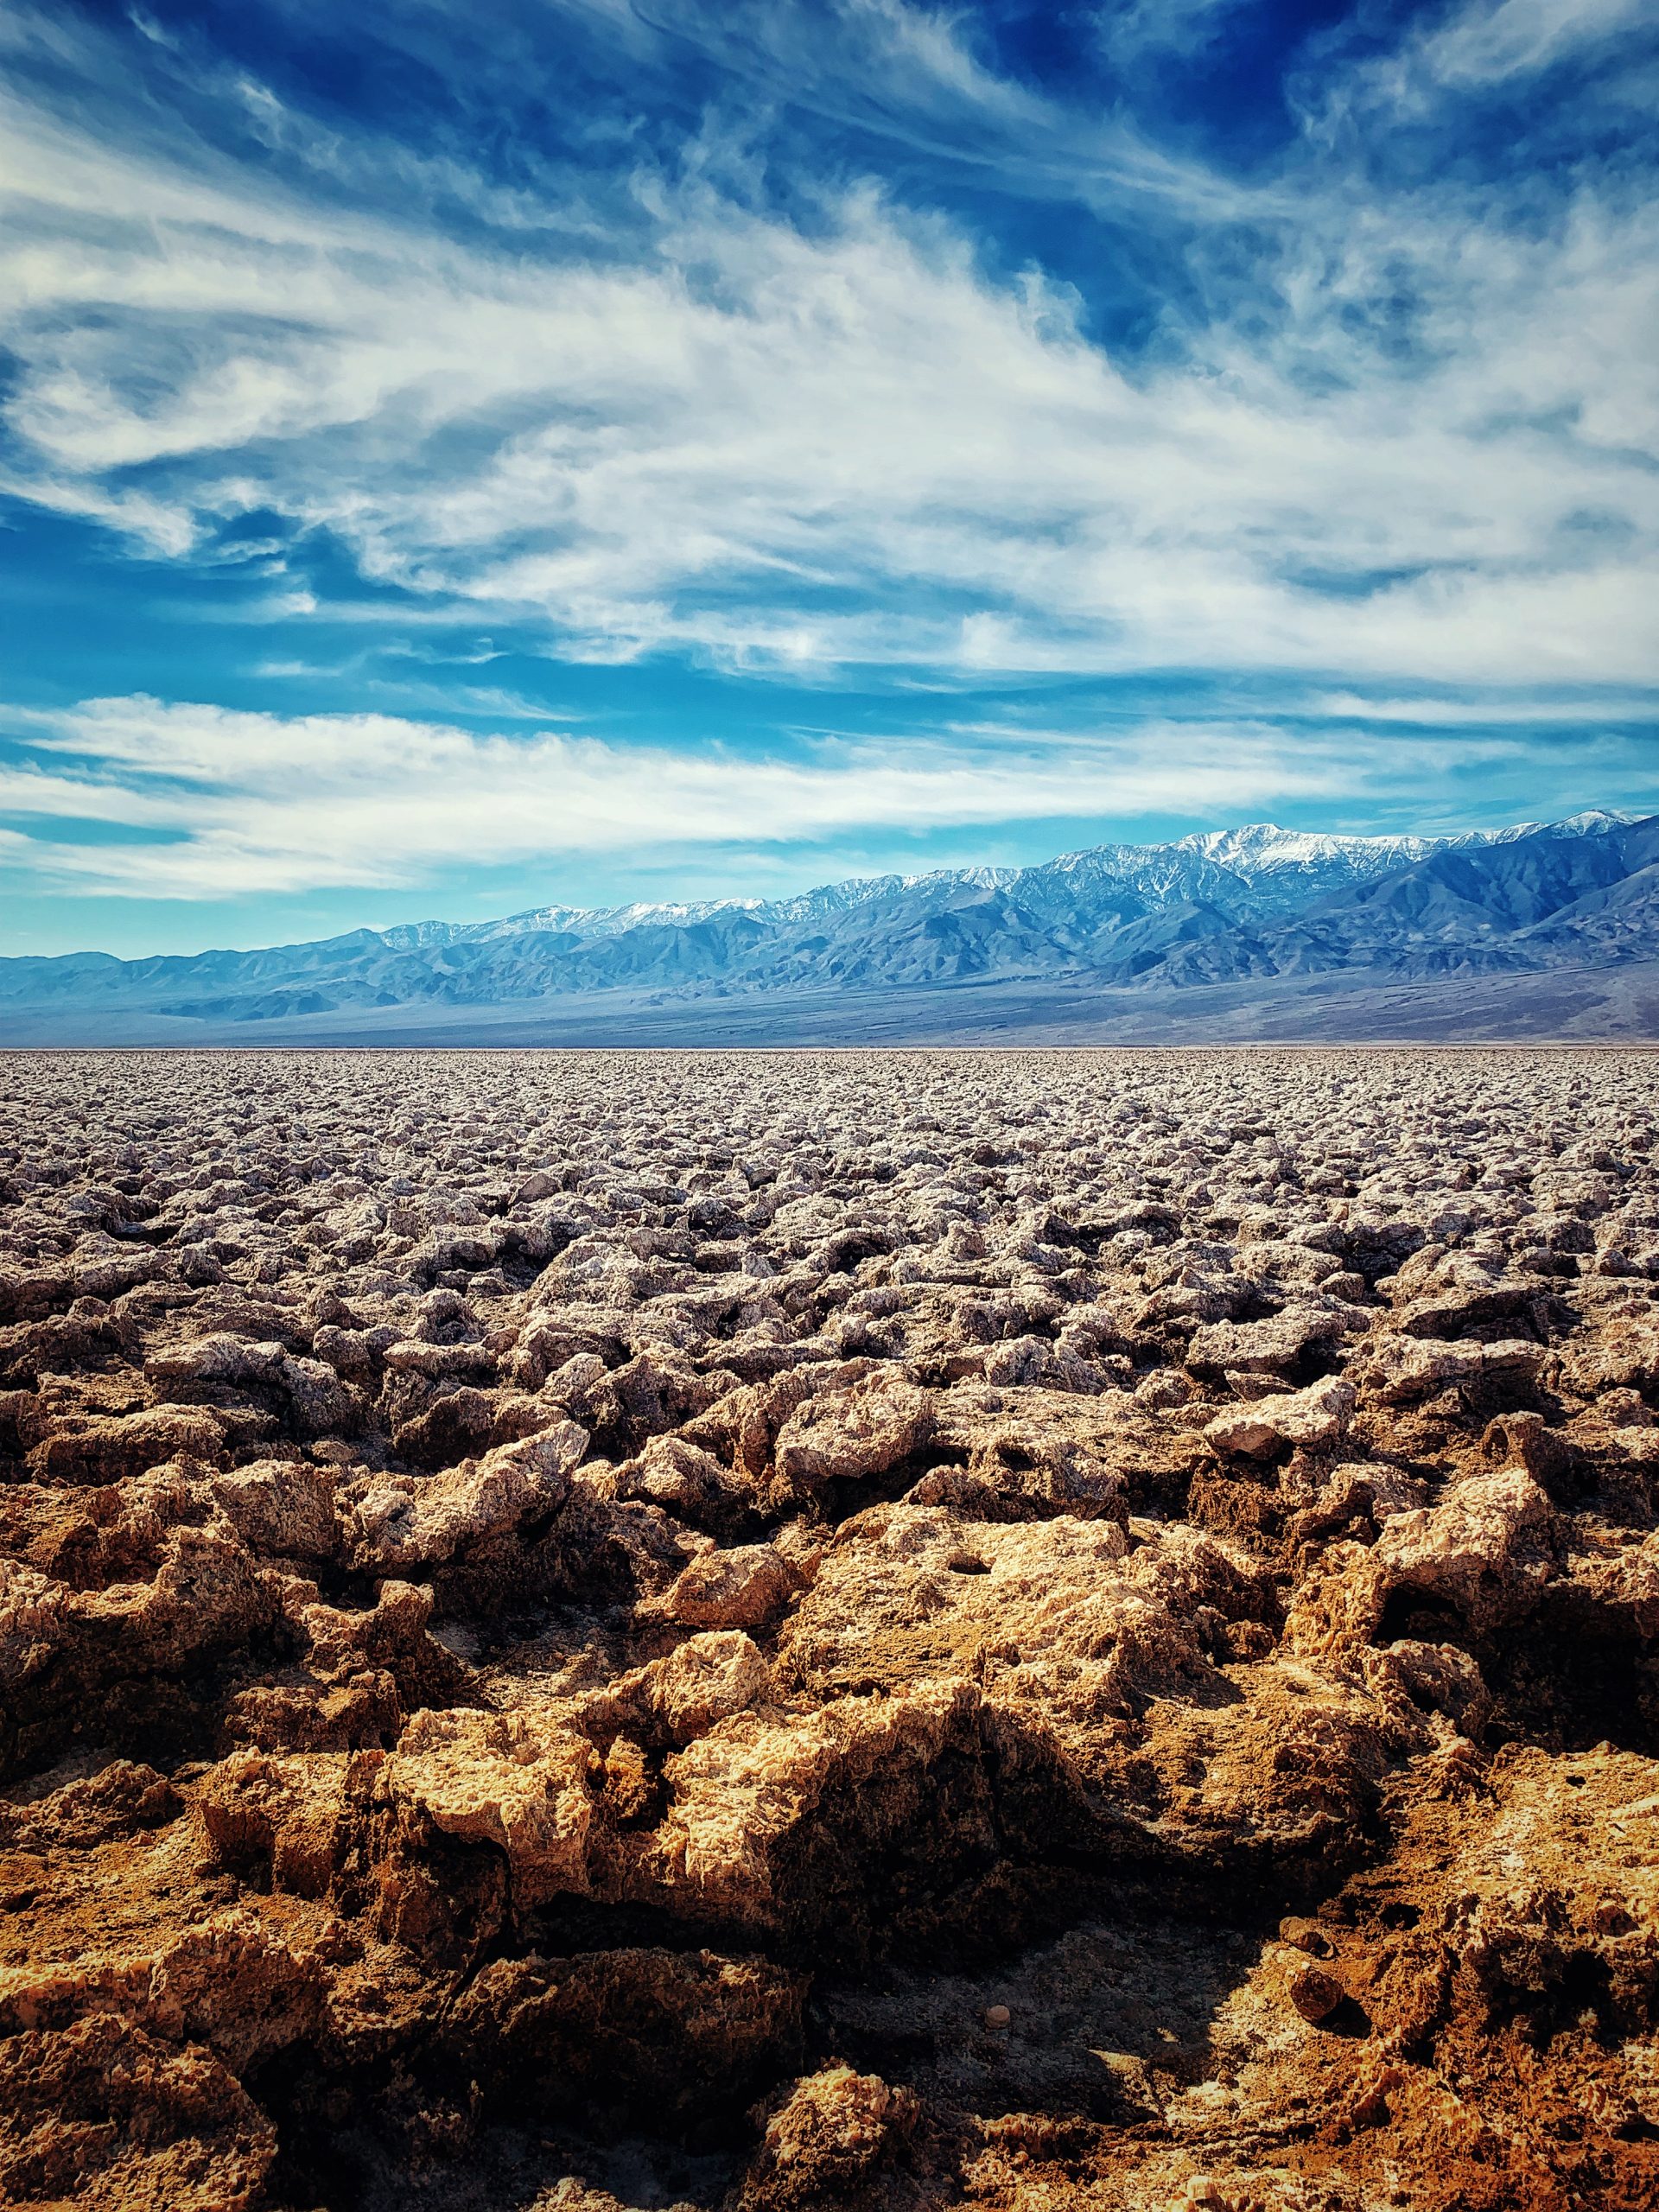 The rocky terrain and texture of the Devil's Golf Course Death Valley